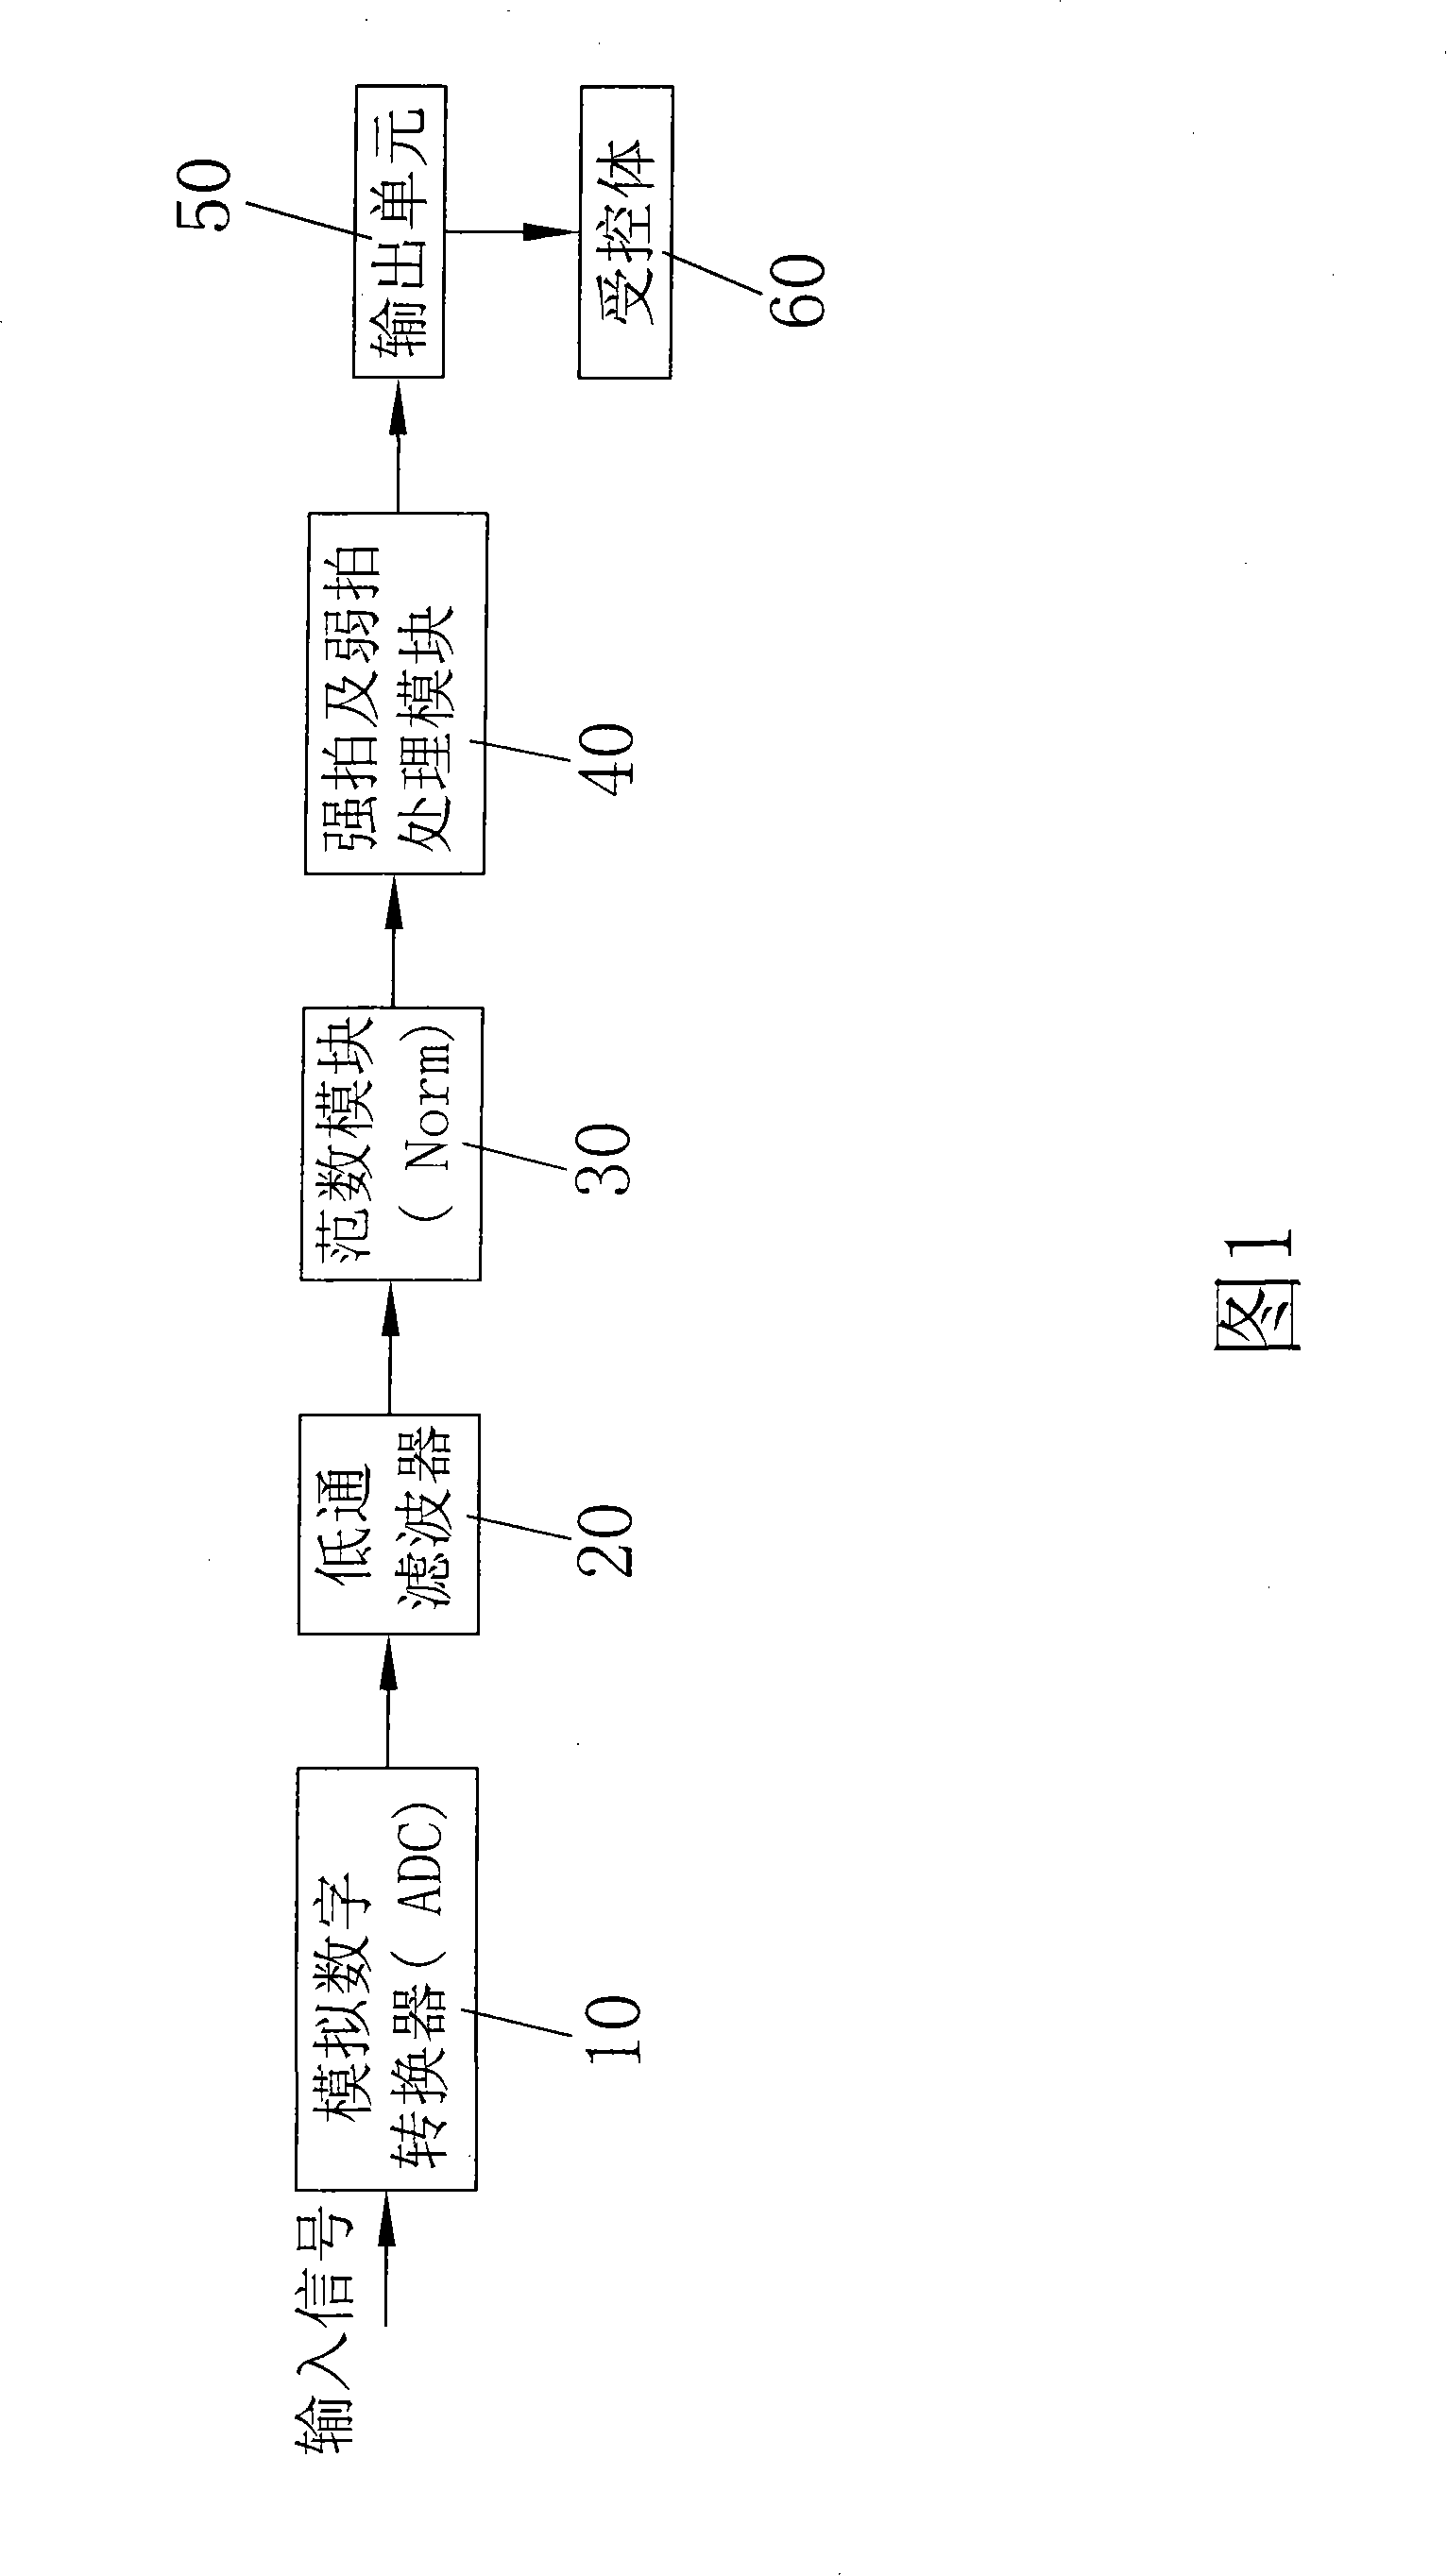 System for detecting downbeat and upbeat of acoustical signal